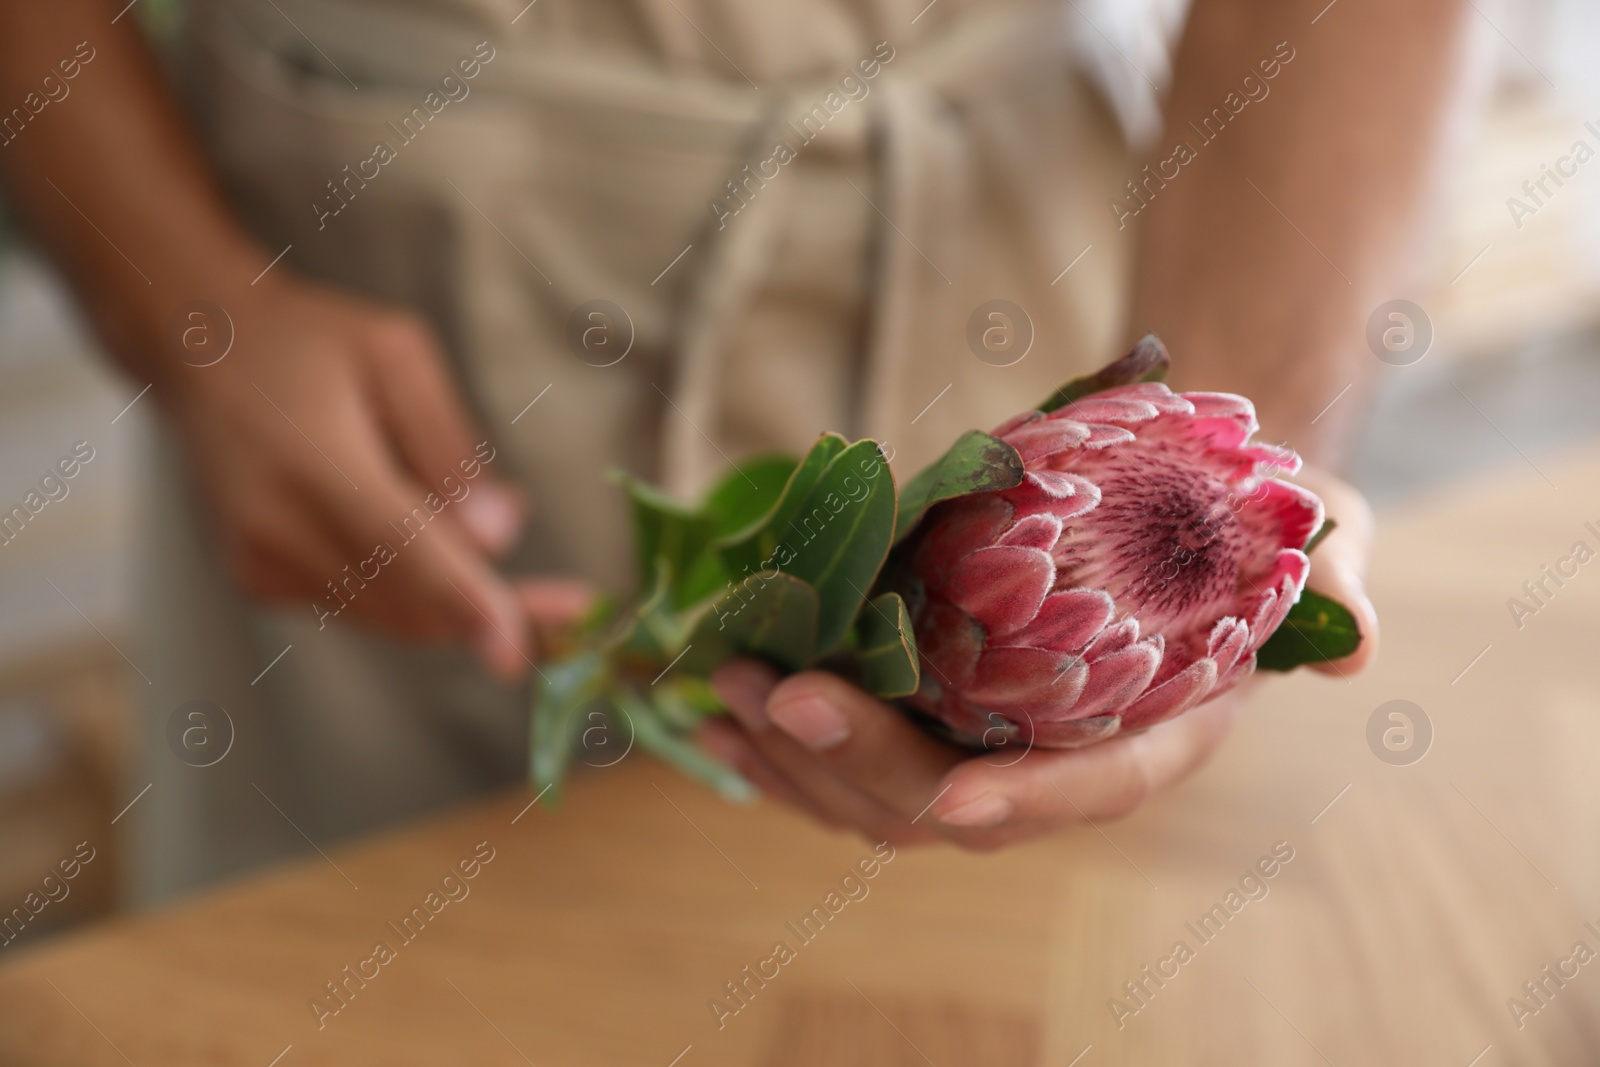 Photo of Florist with beautiful protea flower in workshop, closeup